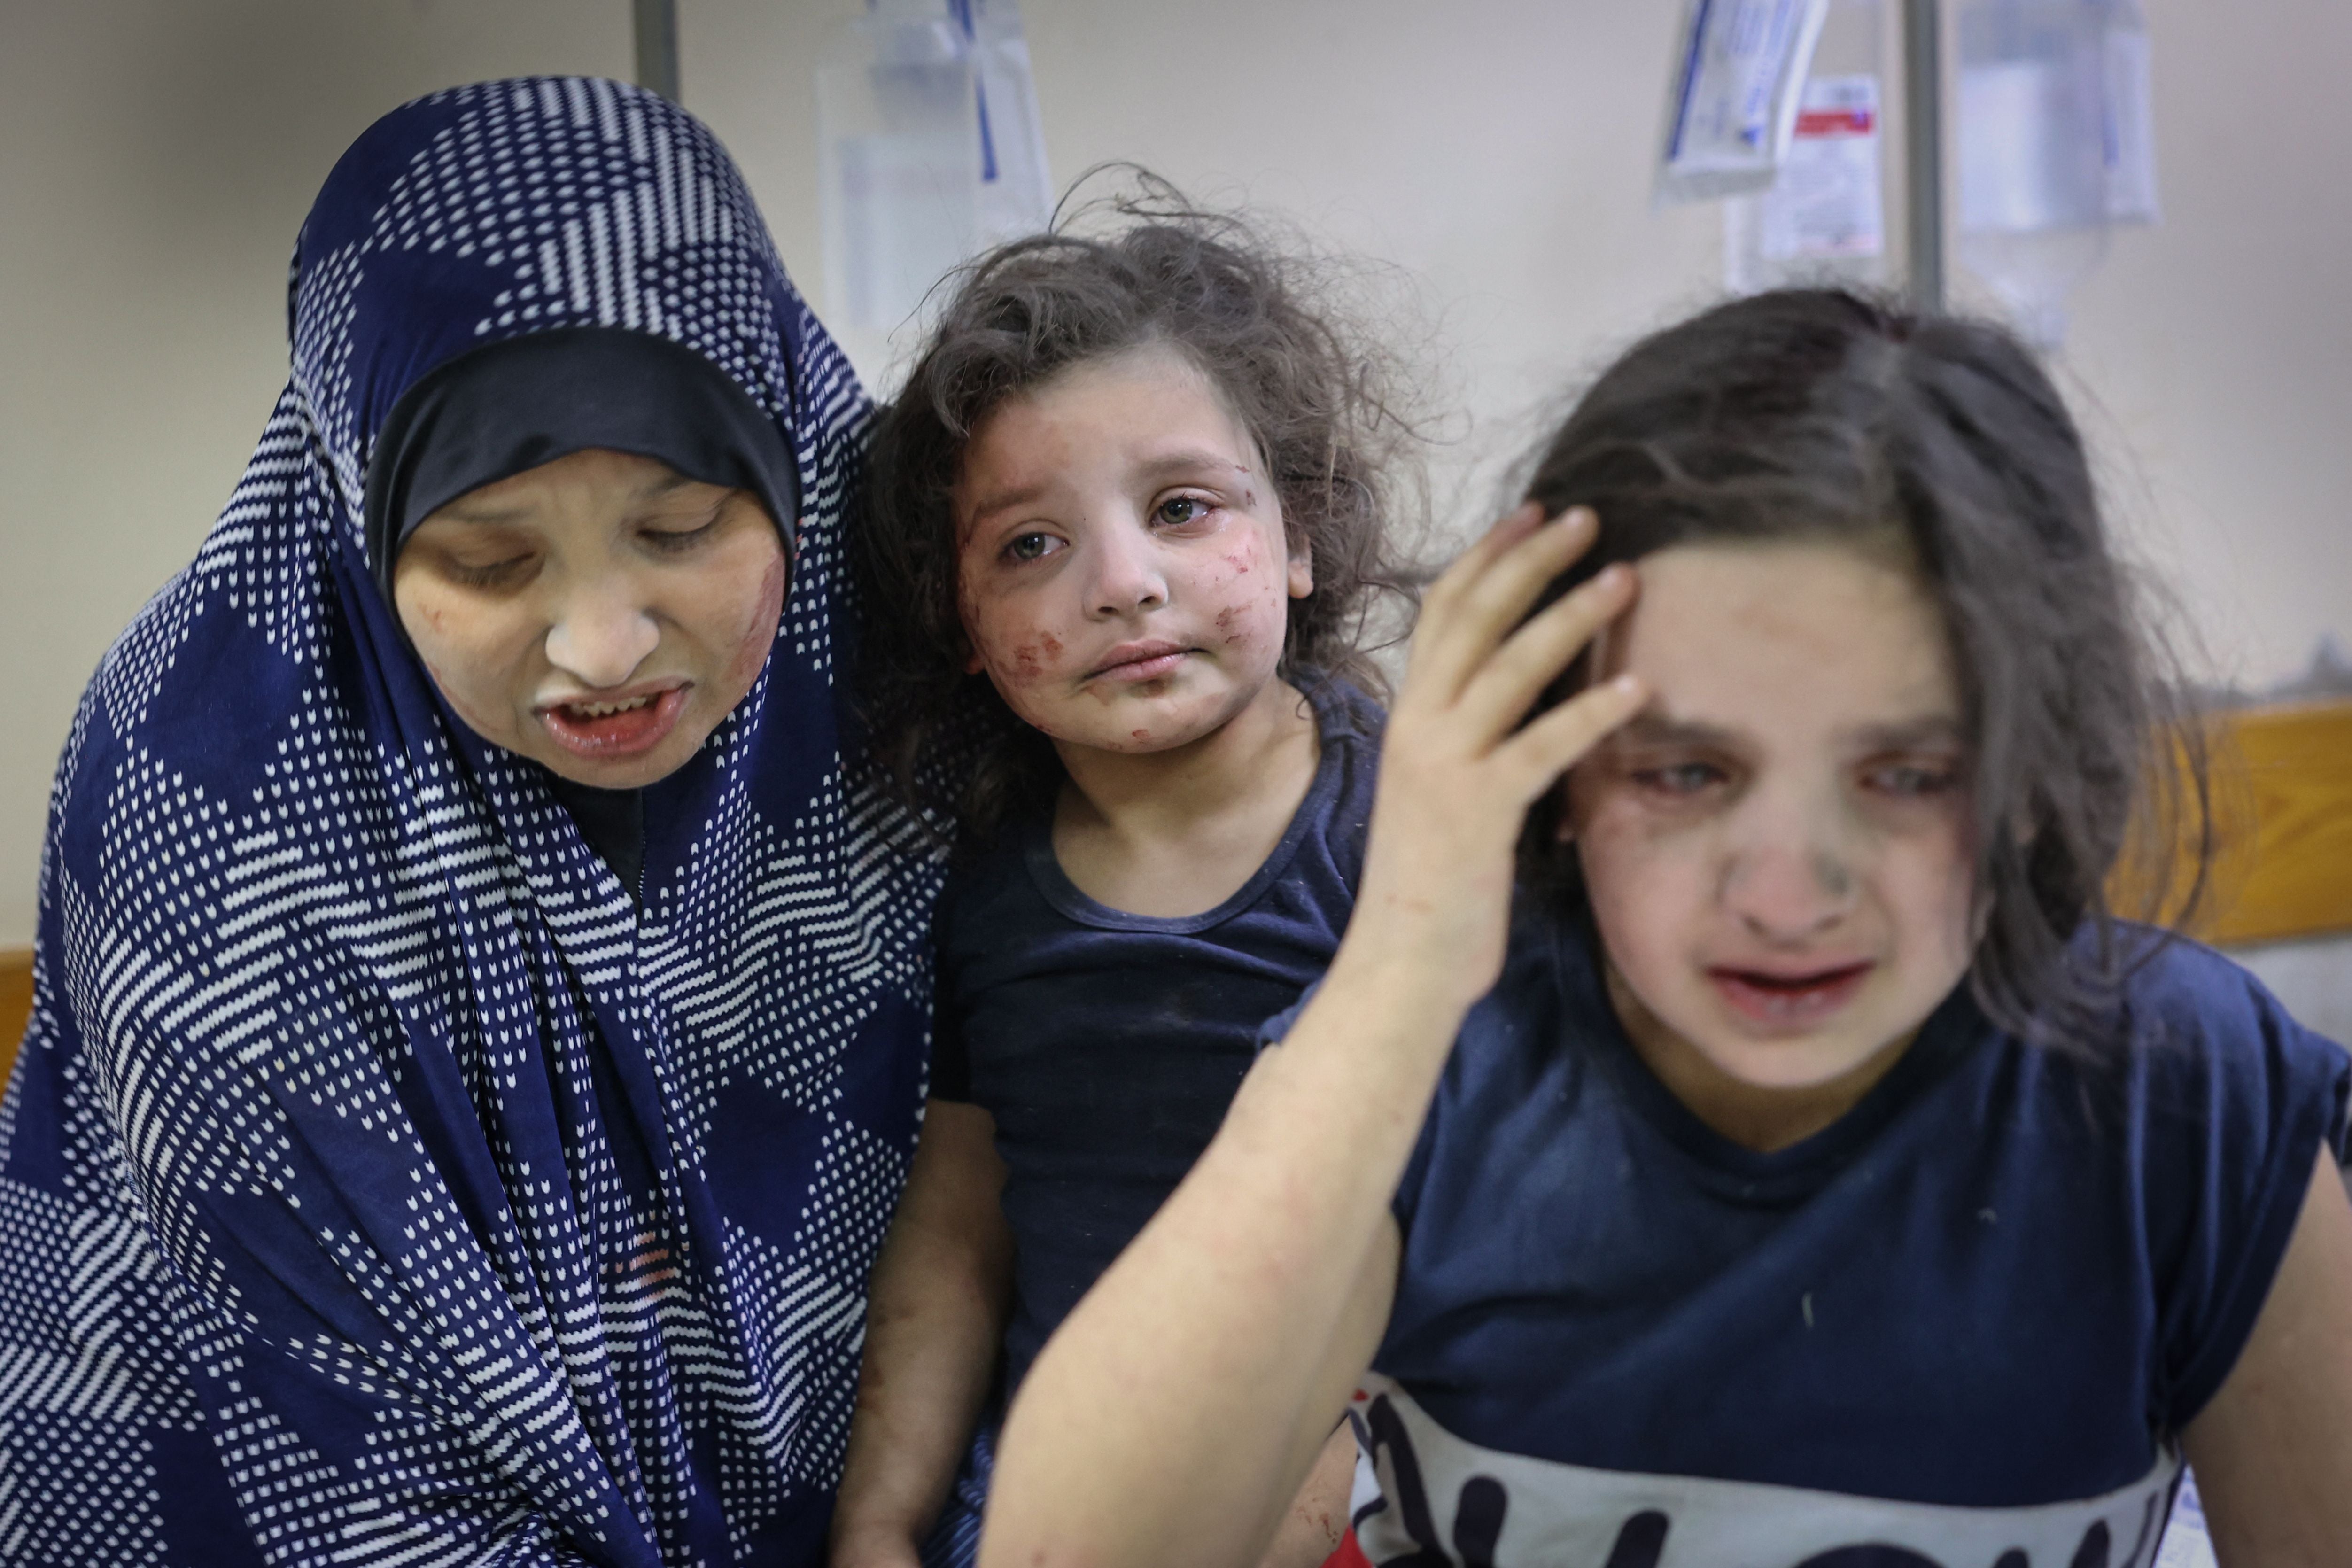 A Palestinian family arrives at Shifa hospital after intensive bombardments on Gaza